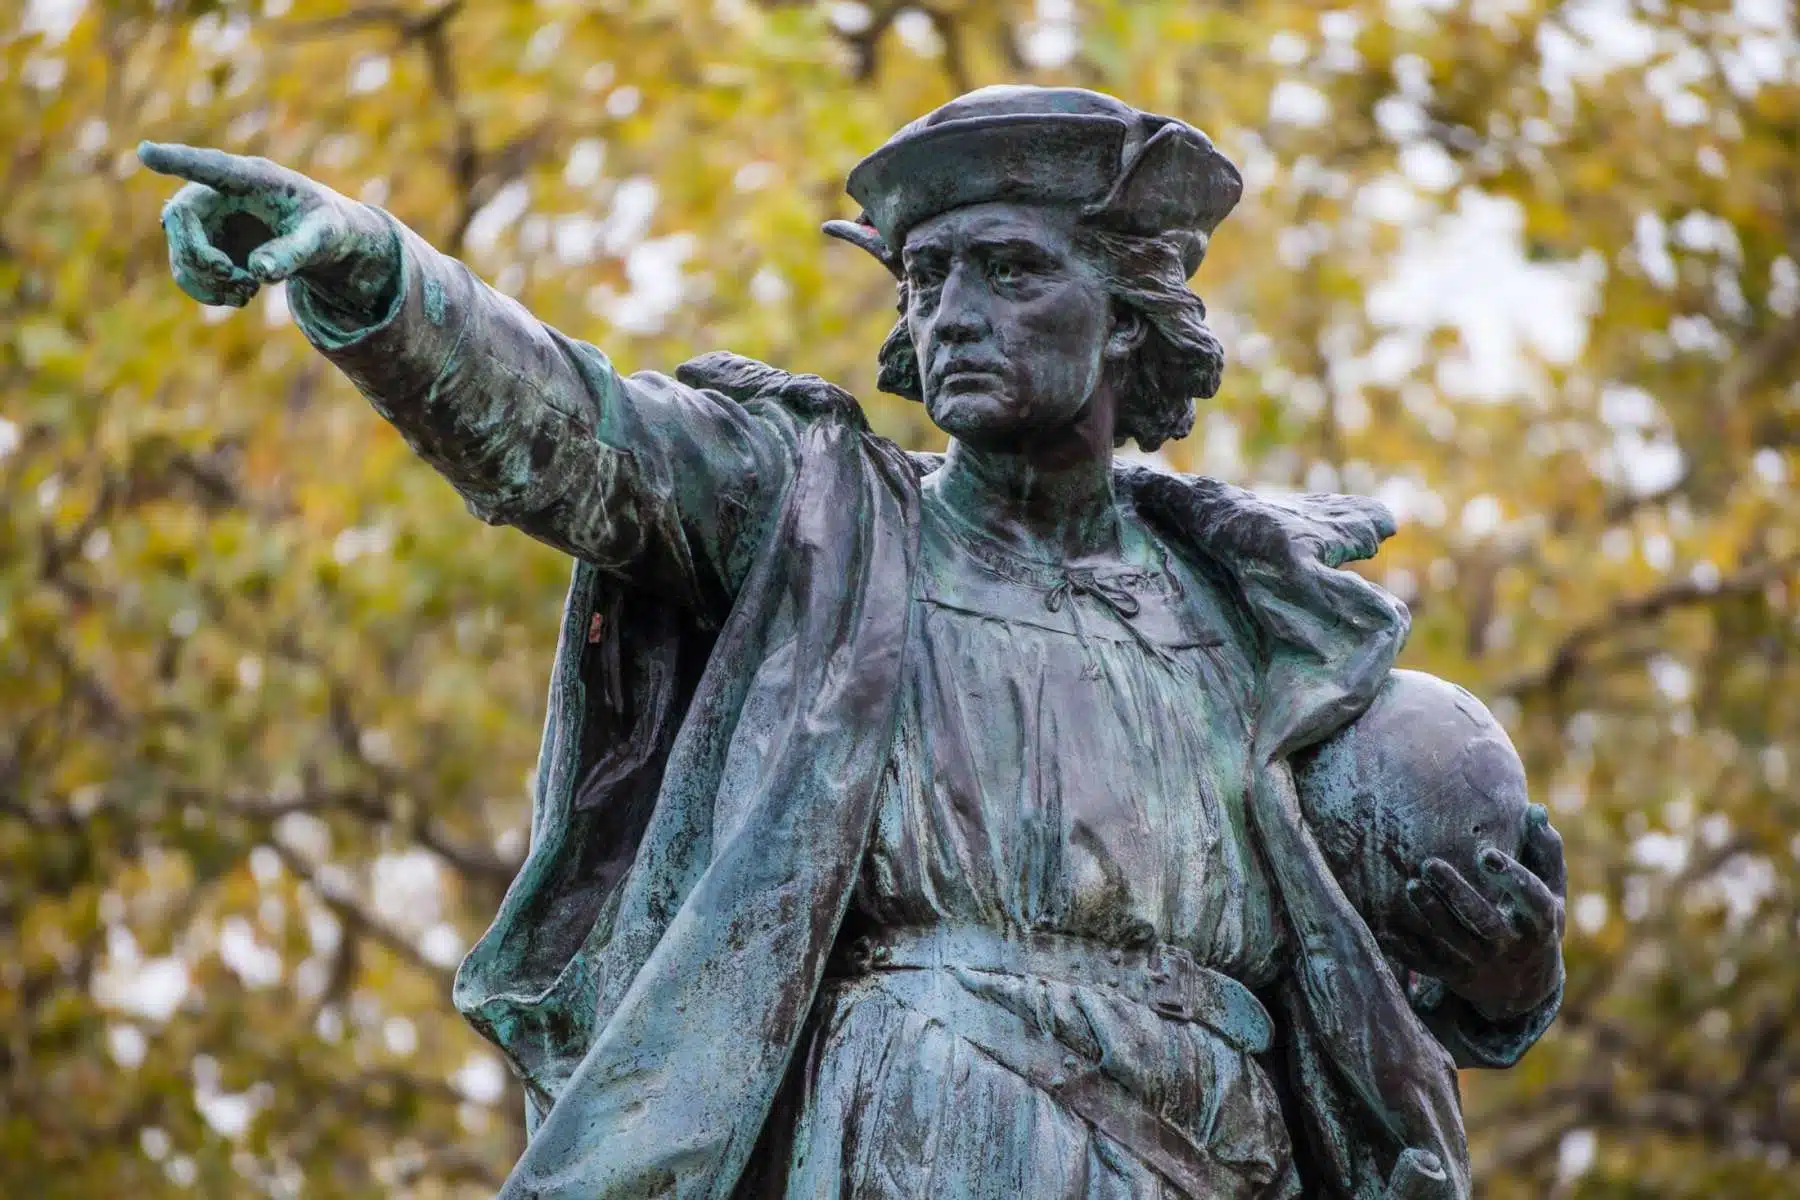 Commemorative Works Committee recommends permanent removal of Columbus statue